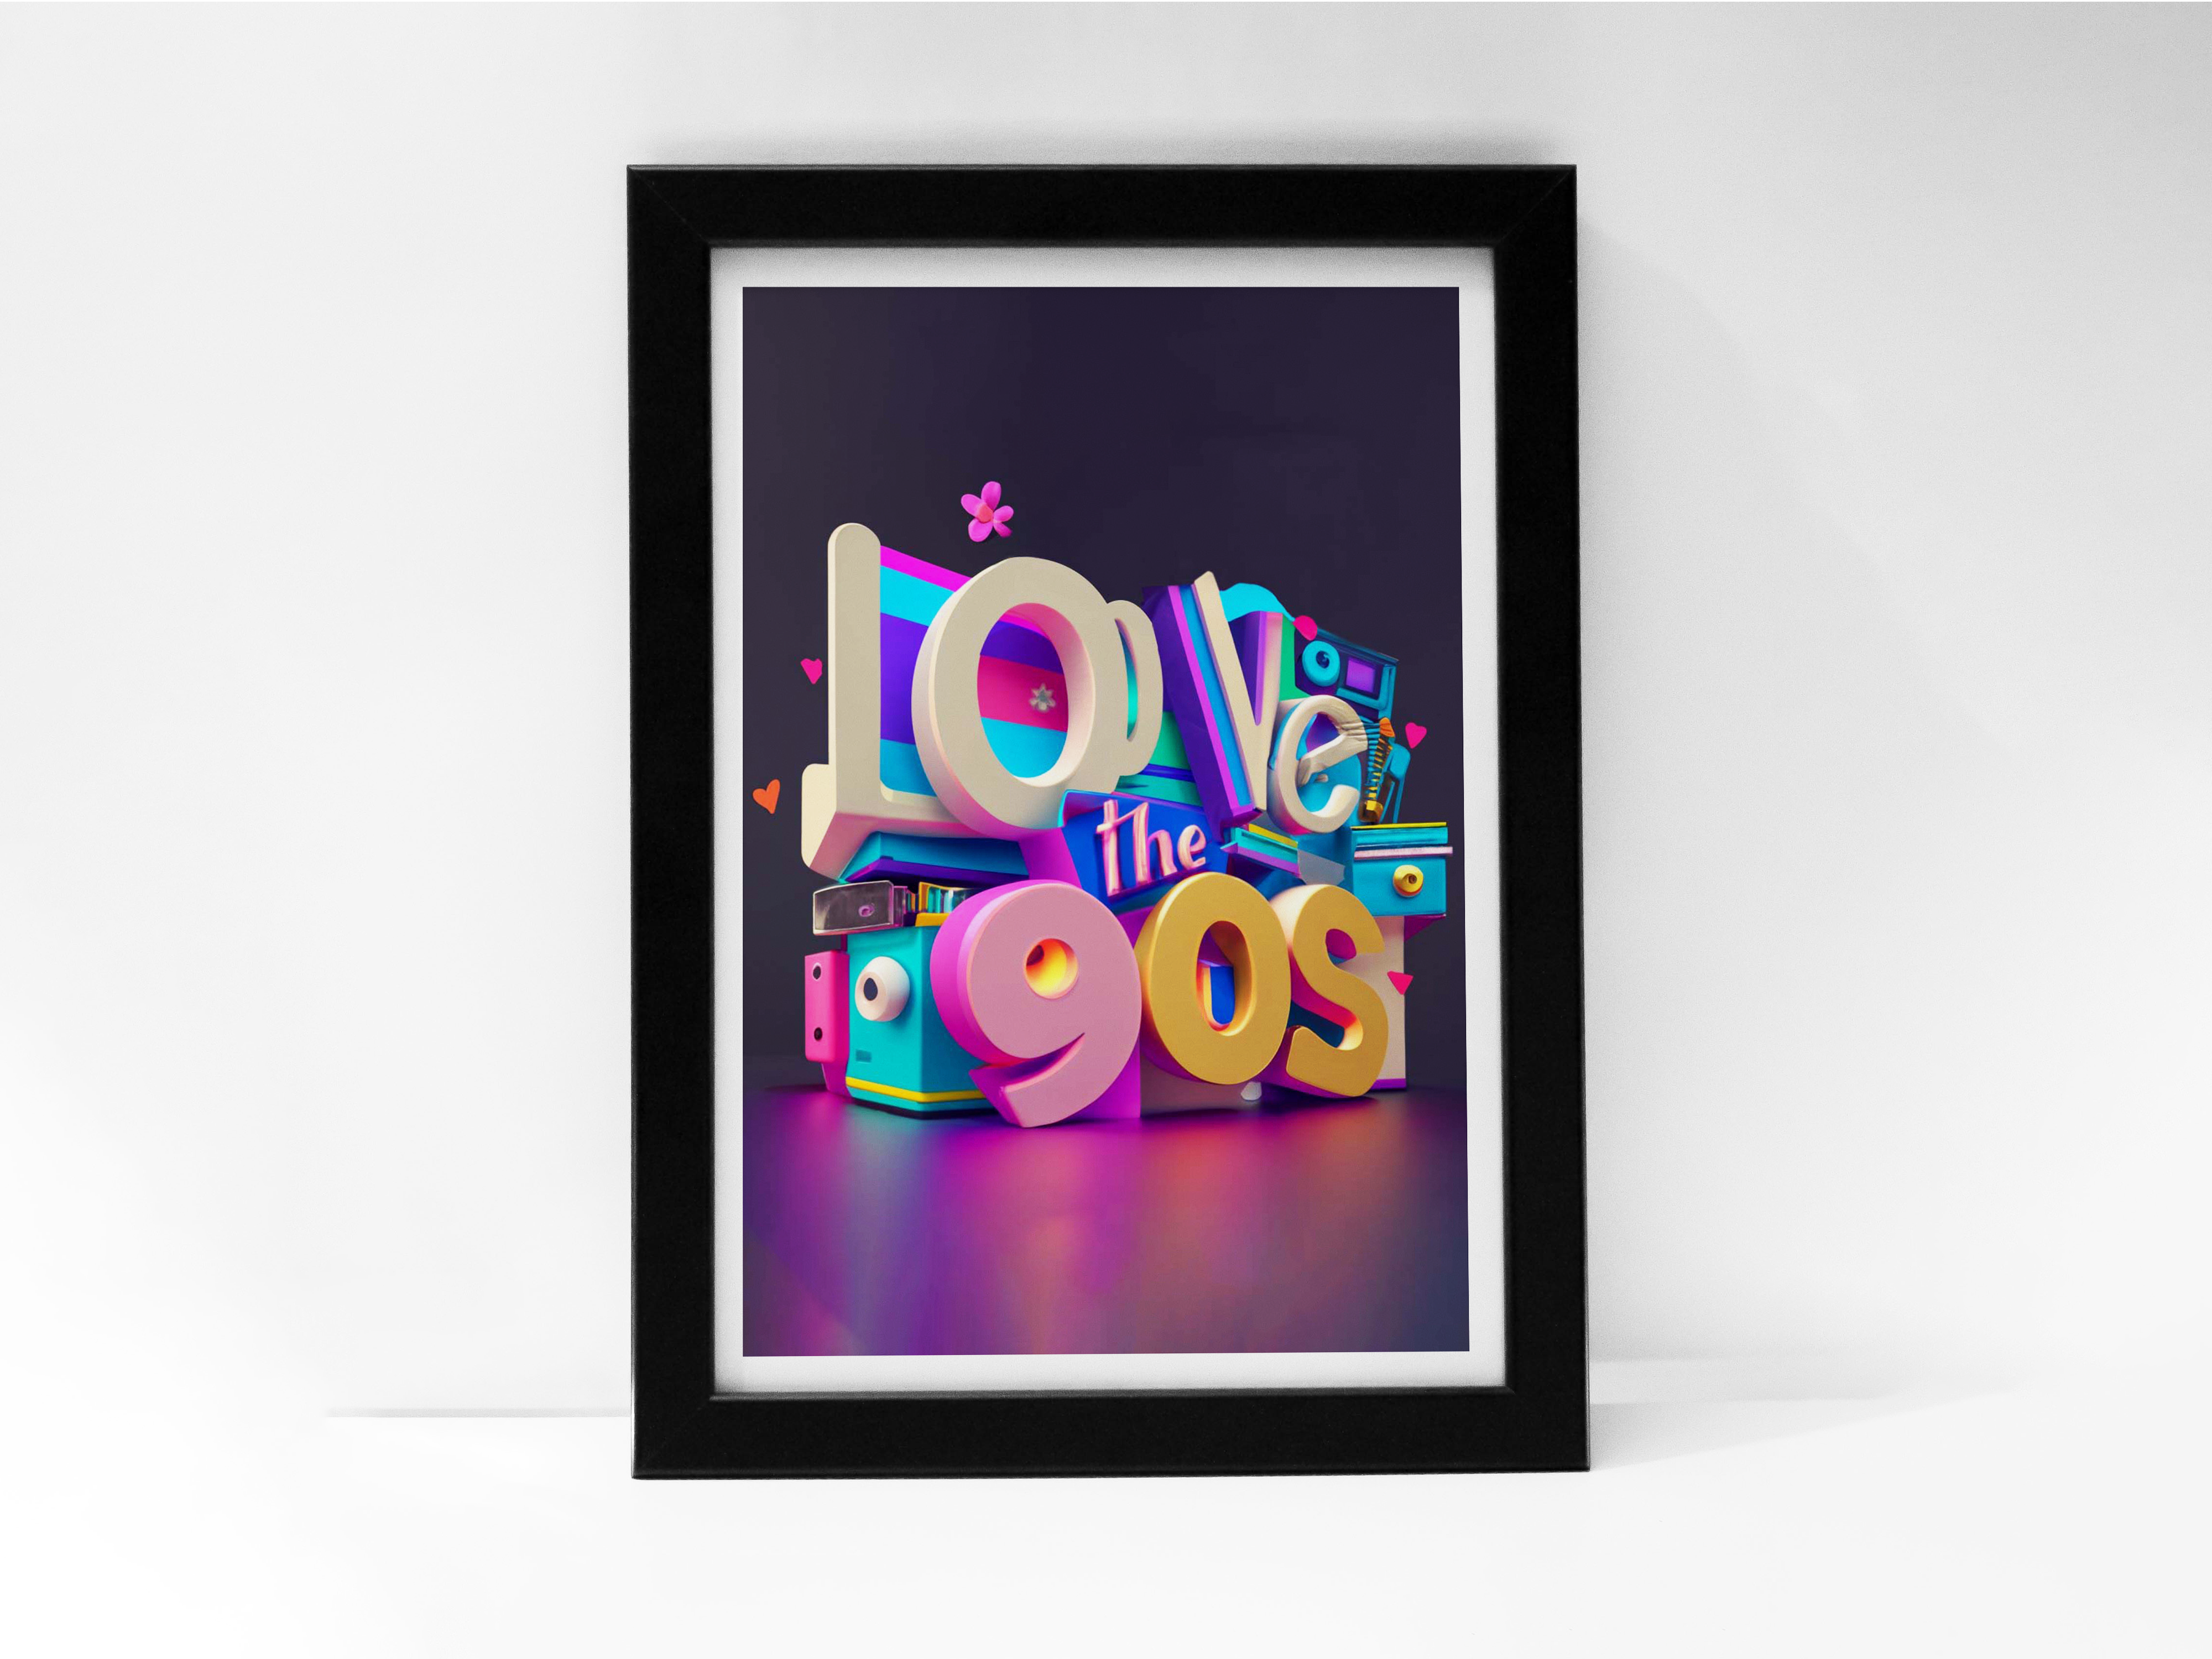 90's Born need a 90's touch: Nostalgic Poster